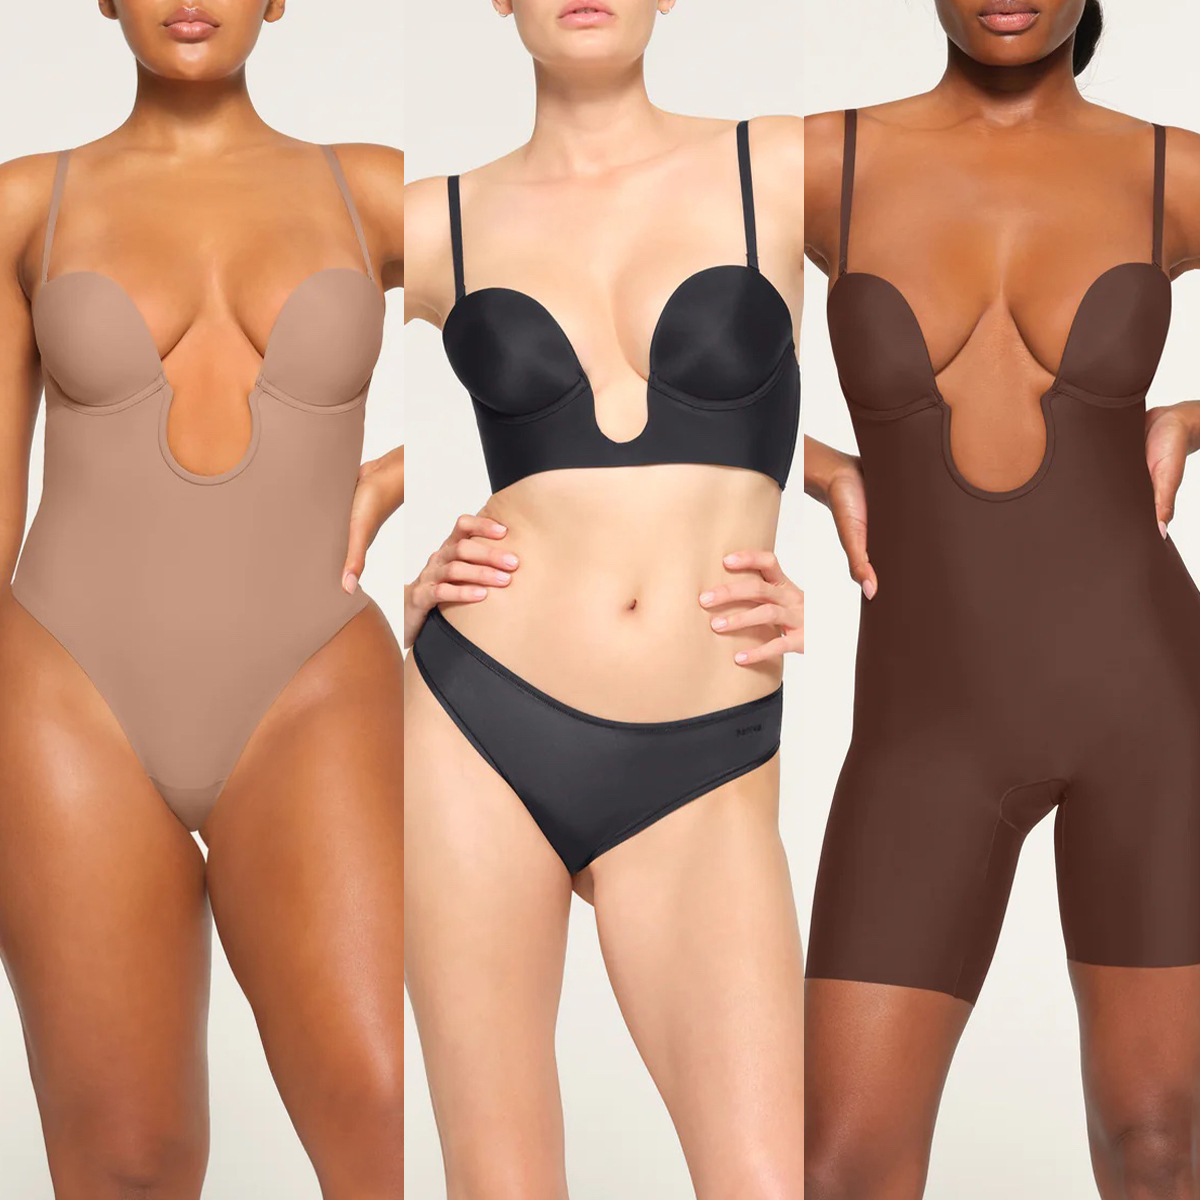 Replying to @dbermudes New @skims Shapewear dropping 4/27 at 9AM